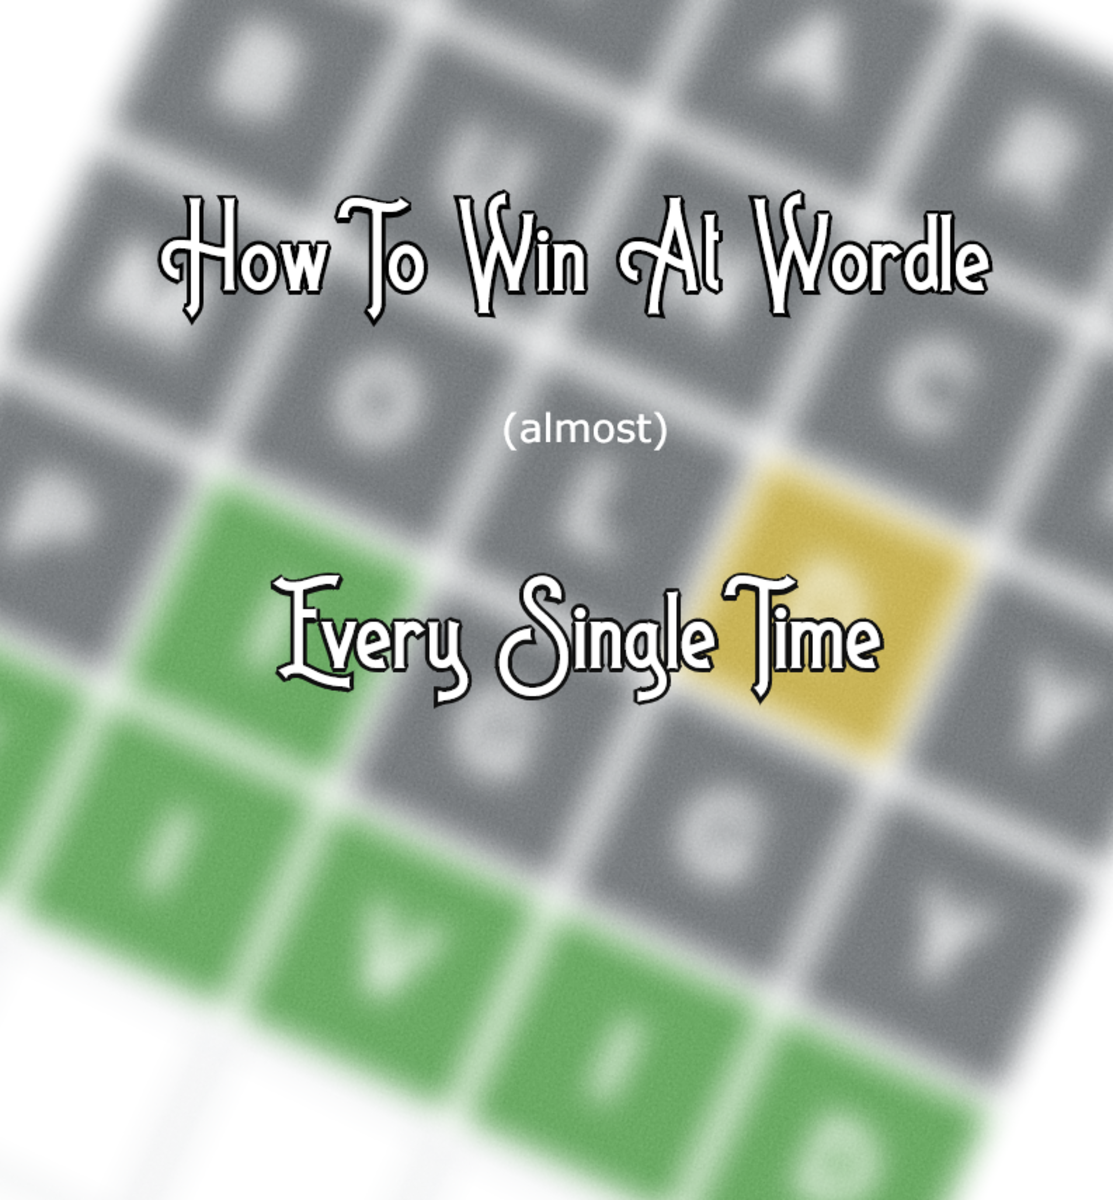 how-to-win-at-wordle-almost-every-single-time-strategies-and-tricks-for-the-puzzle-challenged